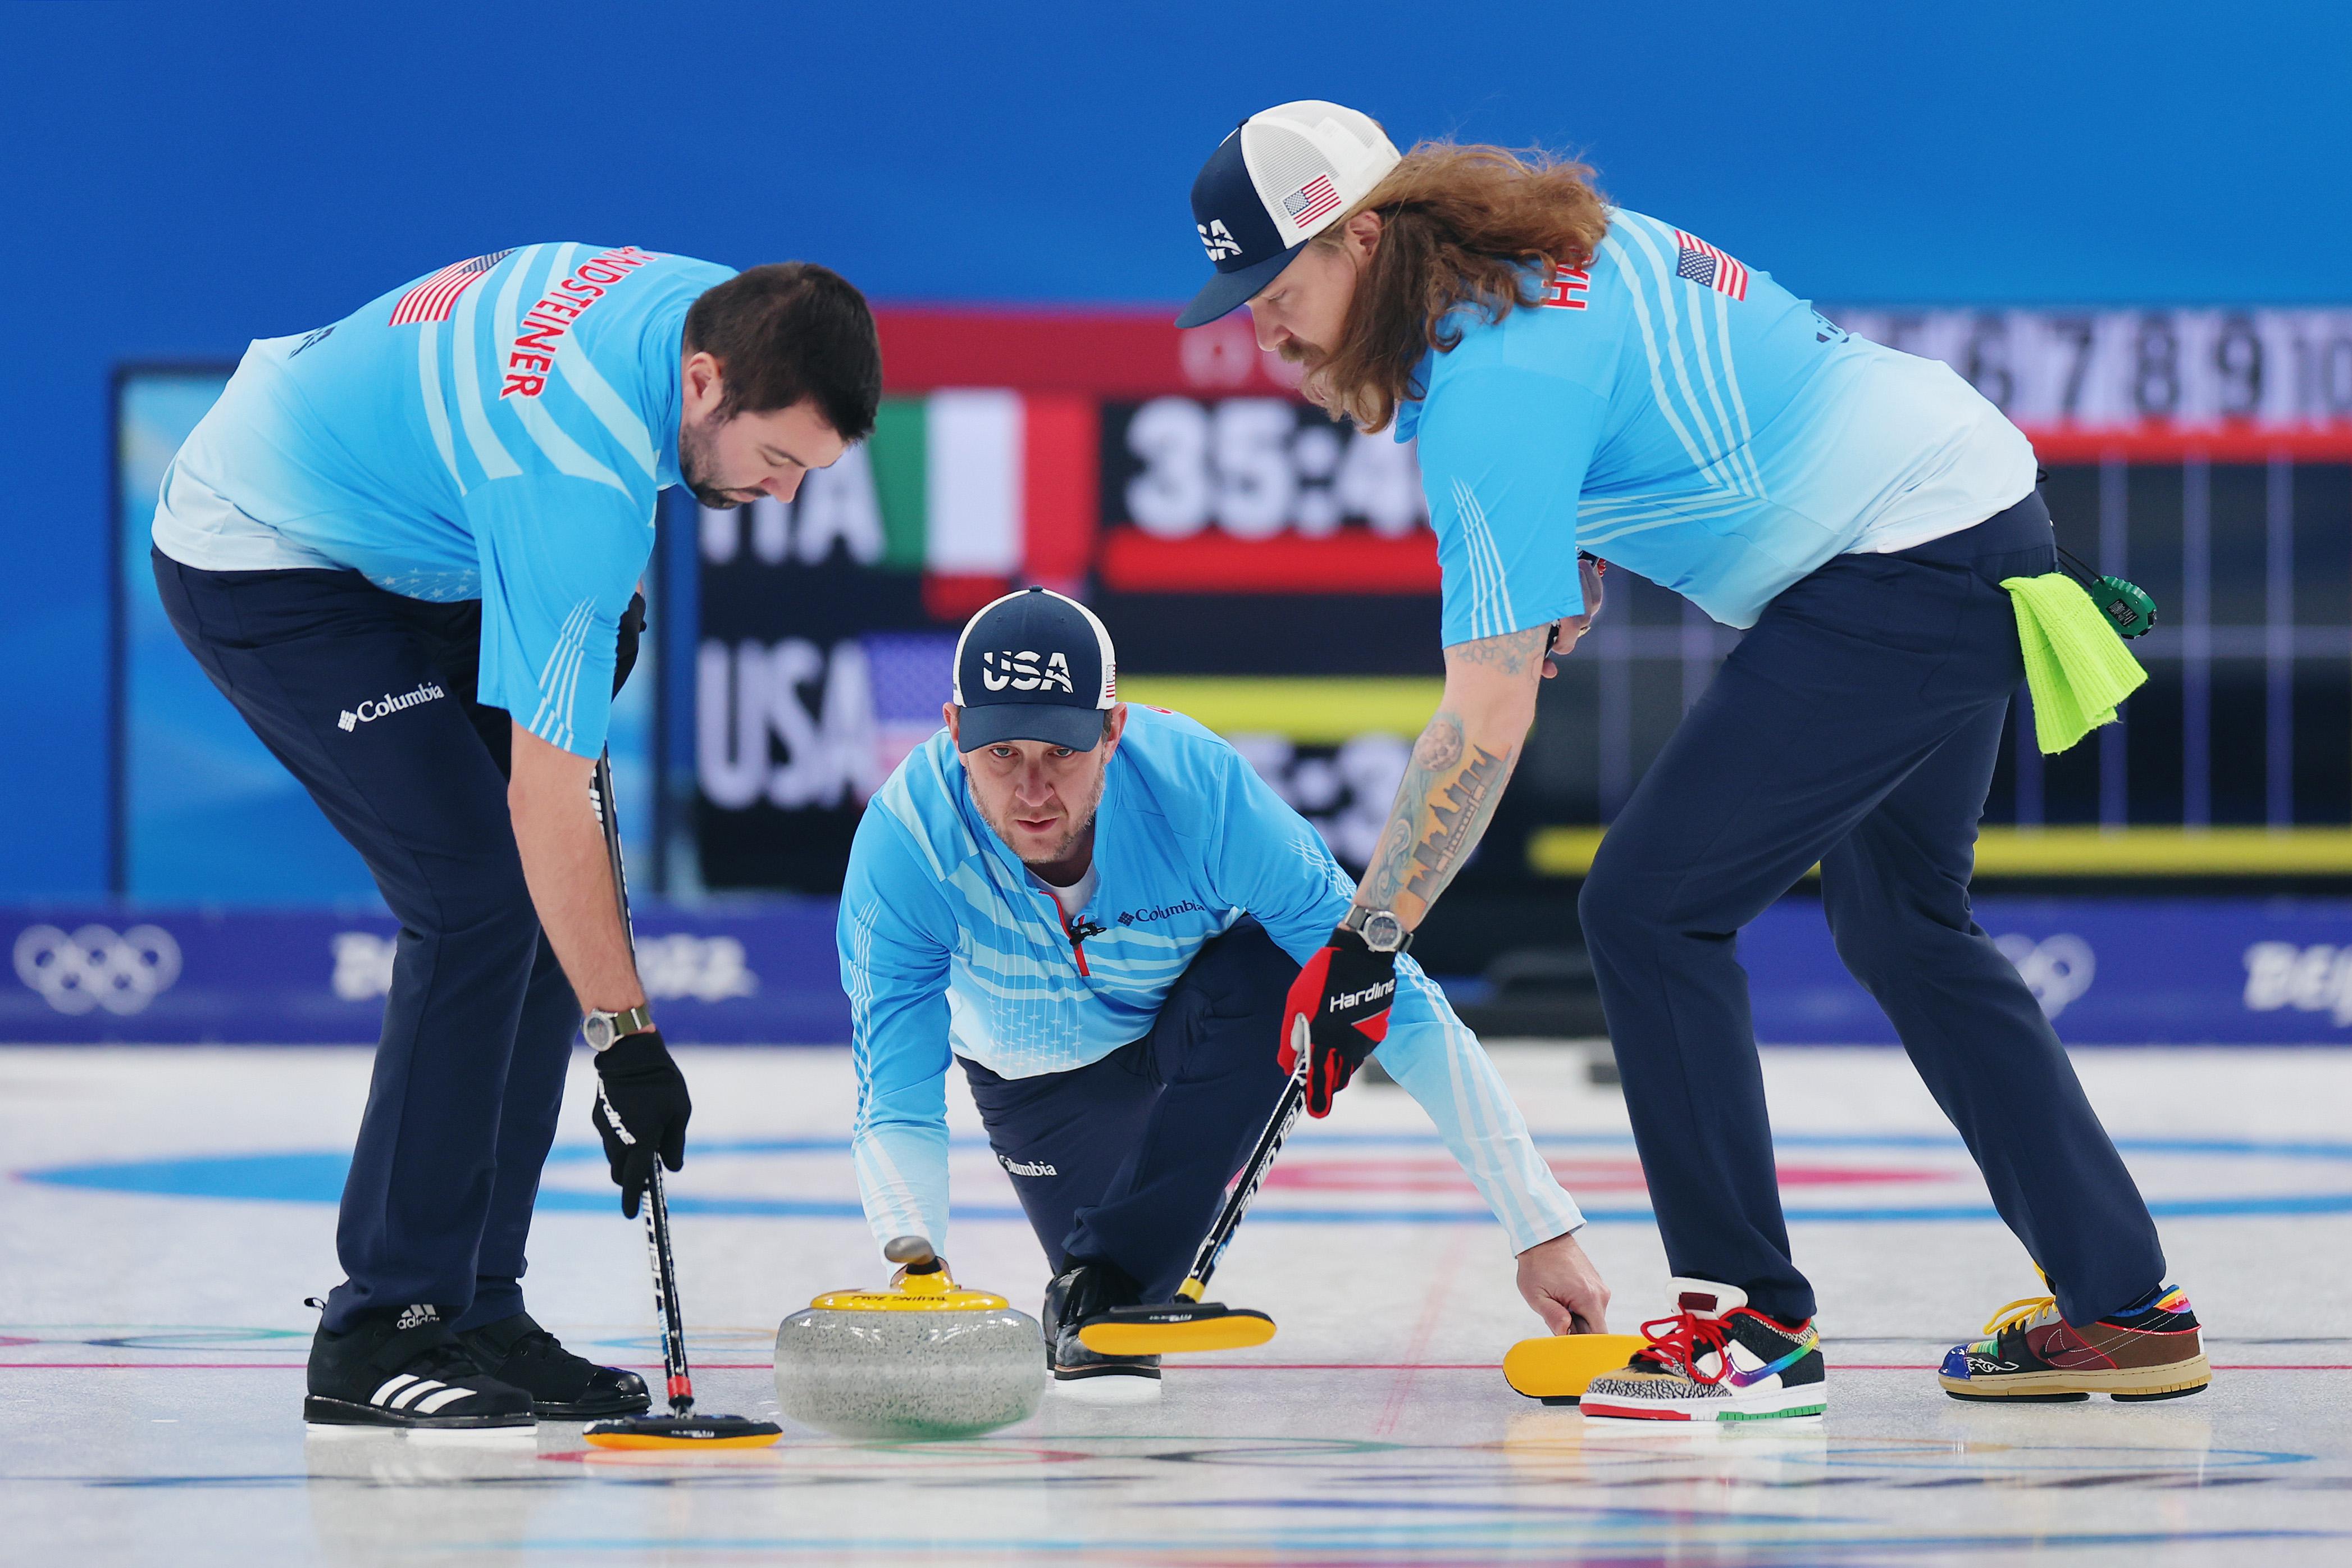 A curler prepares to throw a rock while two teammates stand beside him.